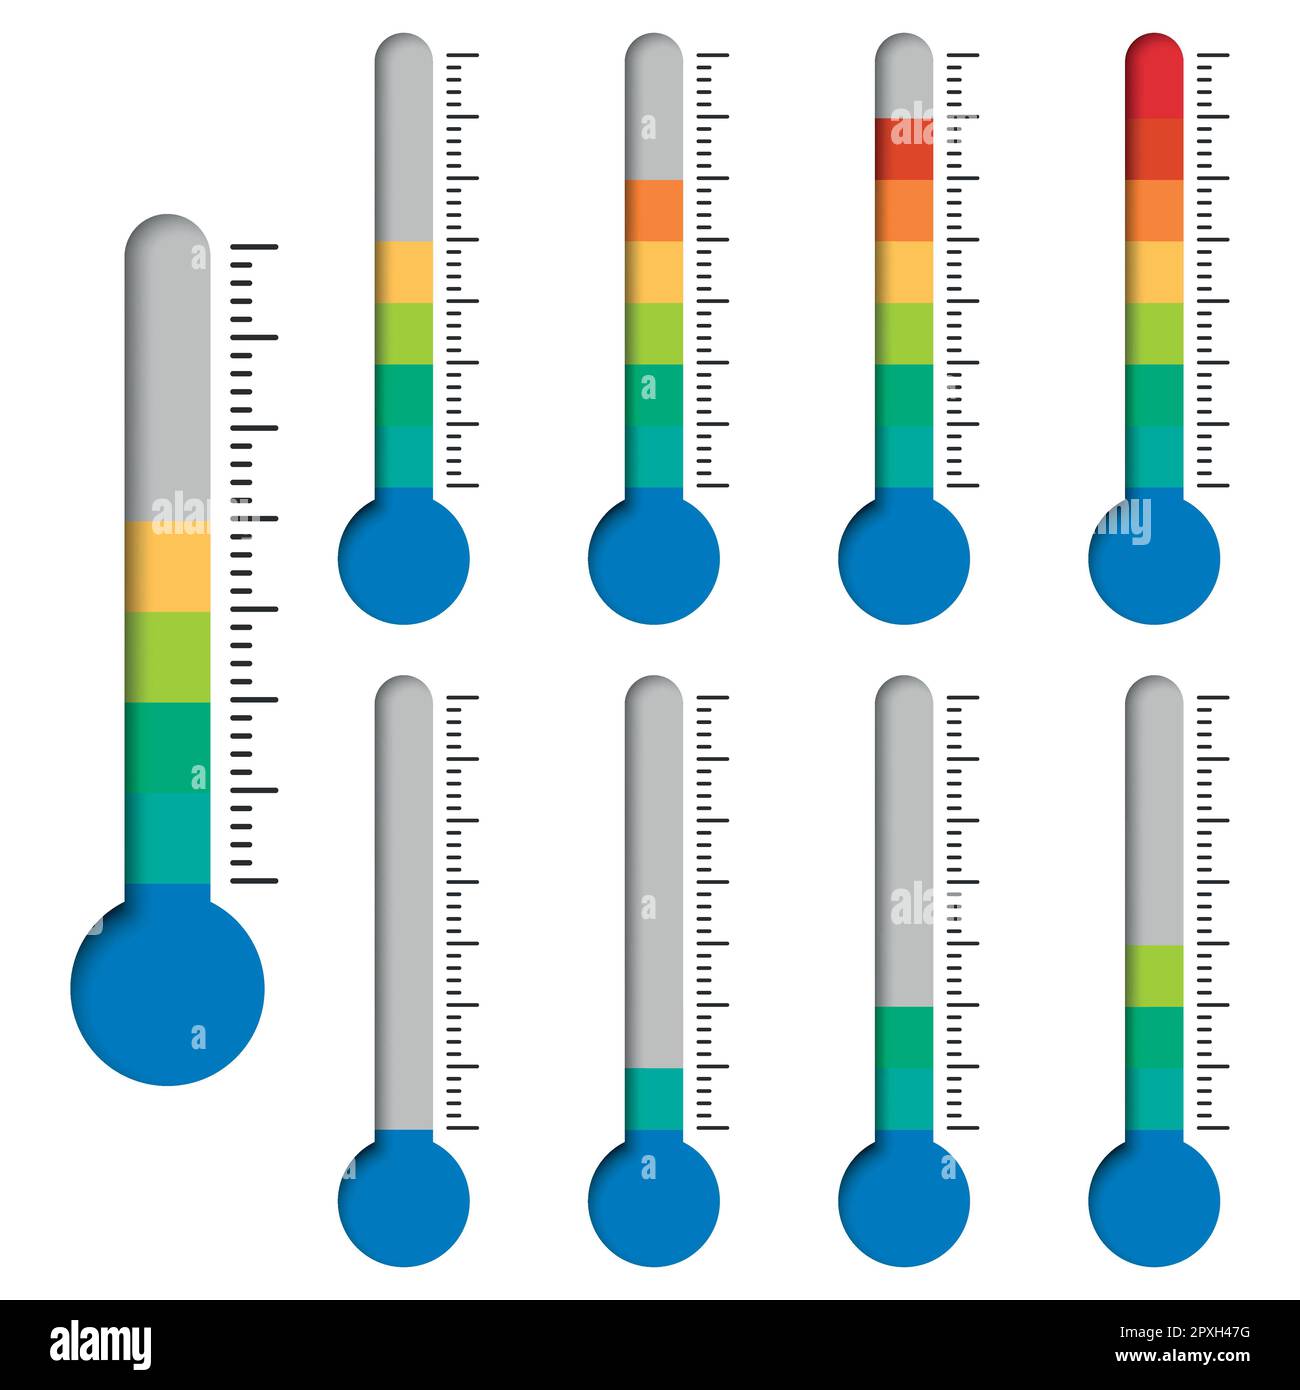 https://c8.alamy.com/comp/2PXH47G/temperature-symbol-set-thermometer-showing-the-temperature-thermometer-icon-vector-illustration-eps-10-2PXH47G.jpg